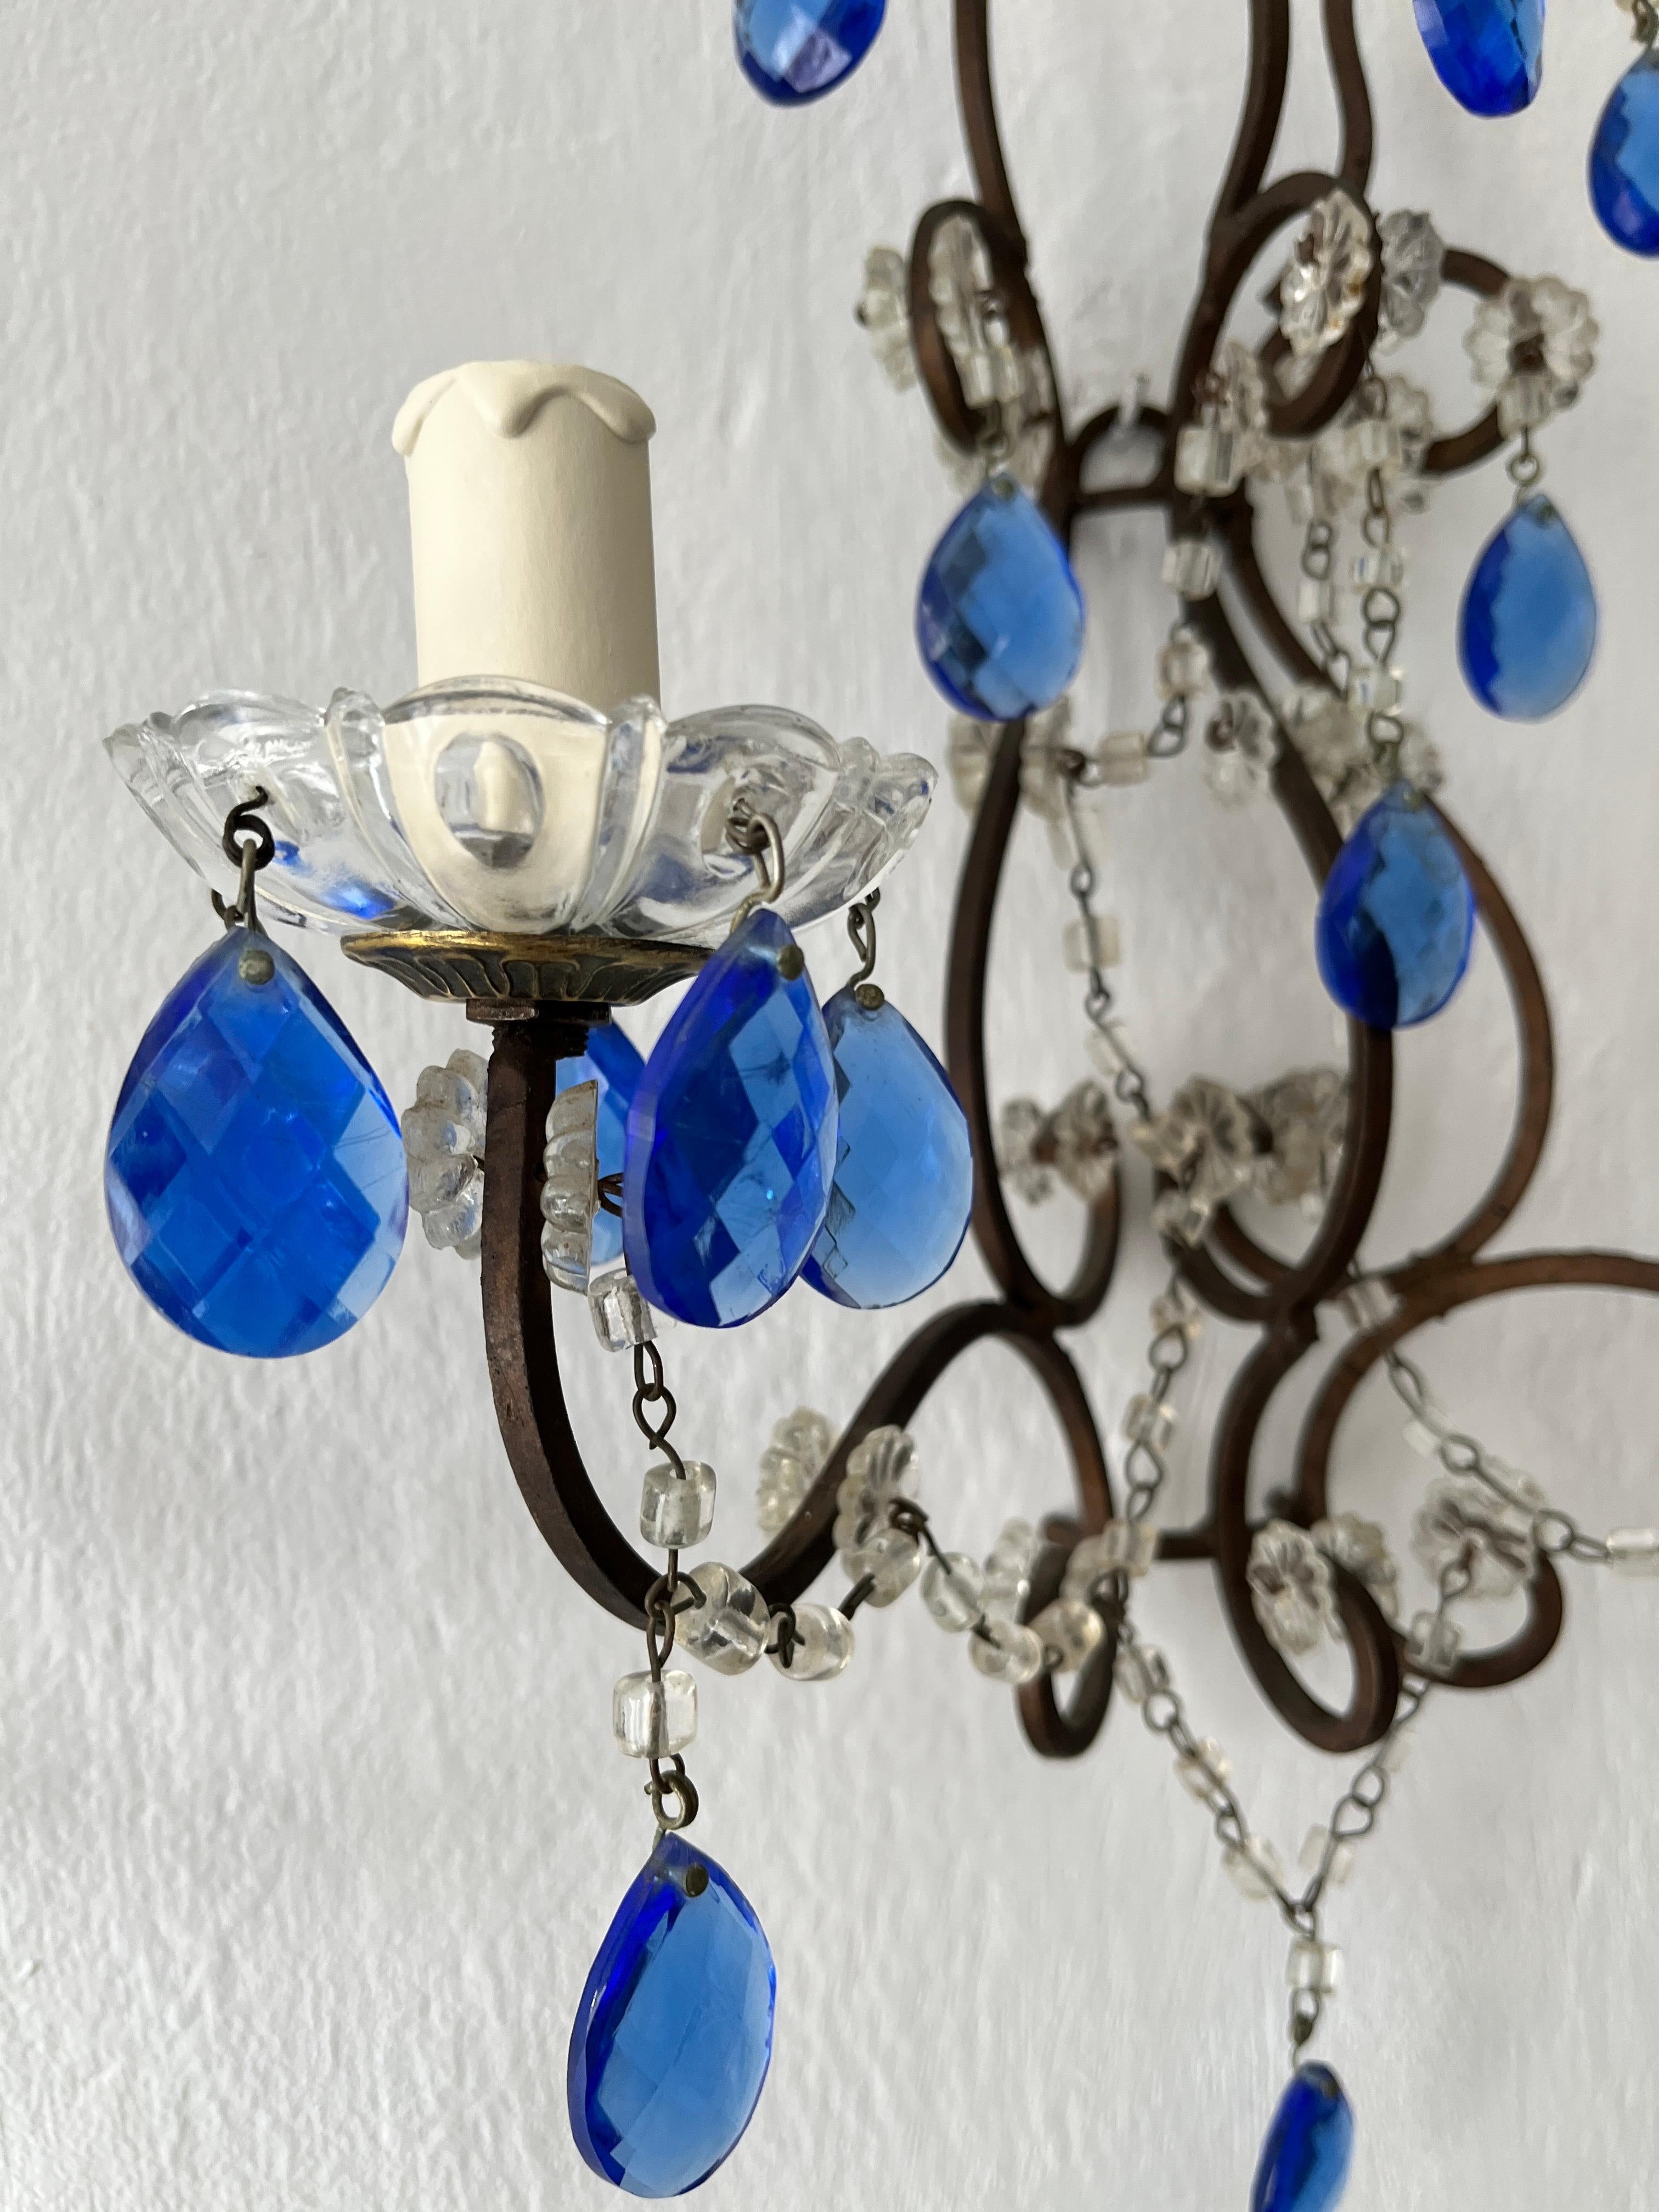 Beautiful French Cobalt Blue Prisms Macaroni Bead Swags Sconces c1920 For Sale 2